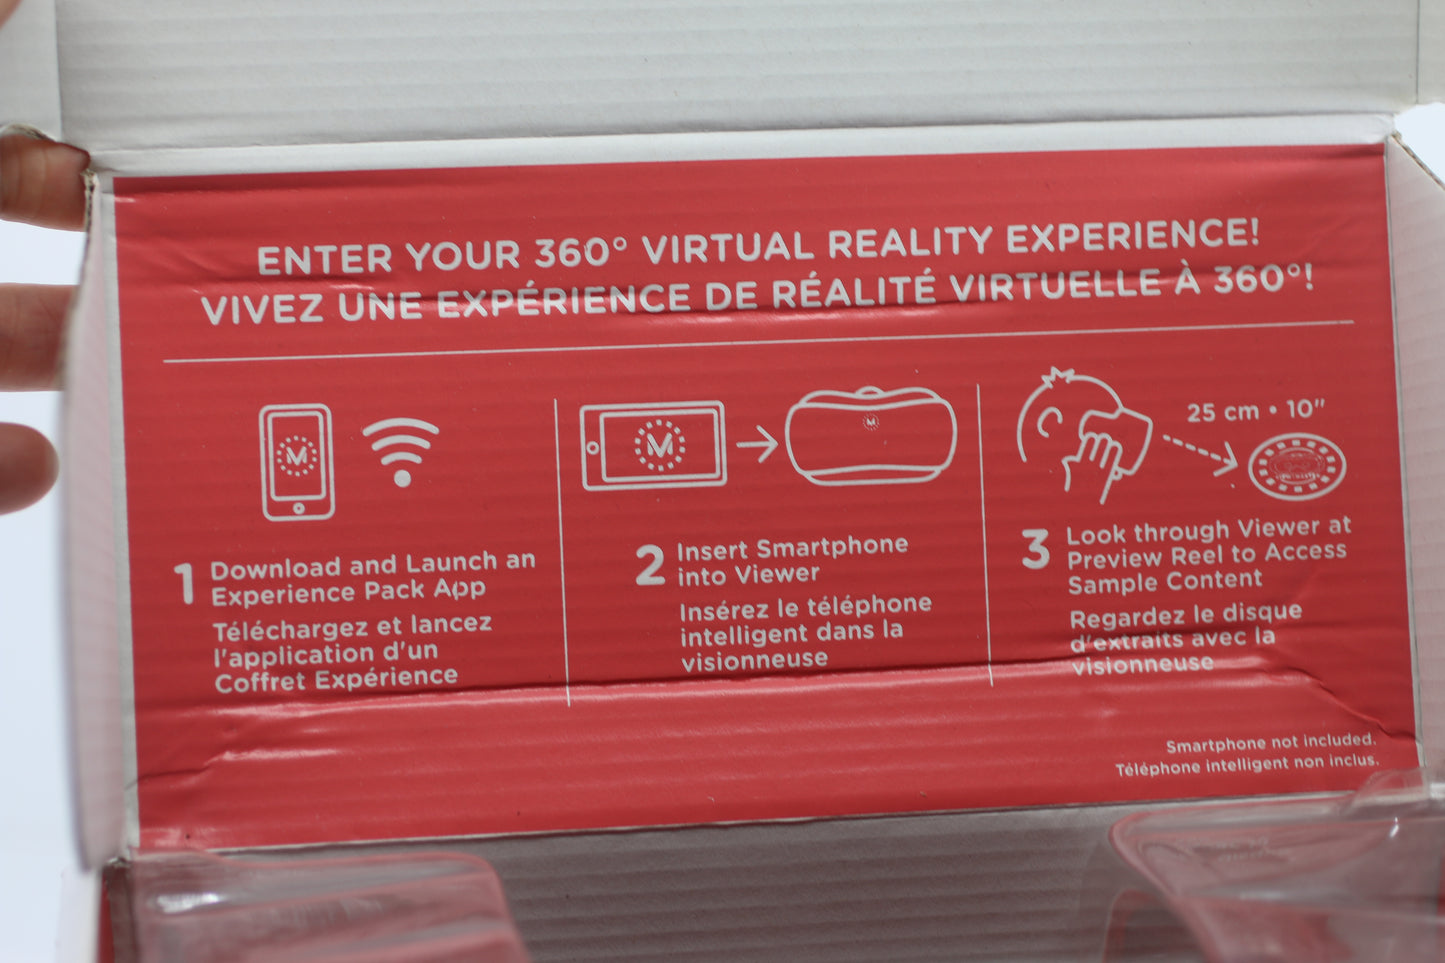 View-master Virtual Reality starter pack w/ box Mattel Canada 2015 APPstore